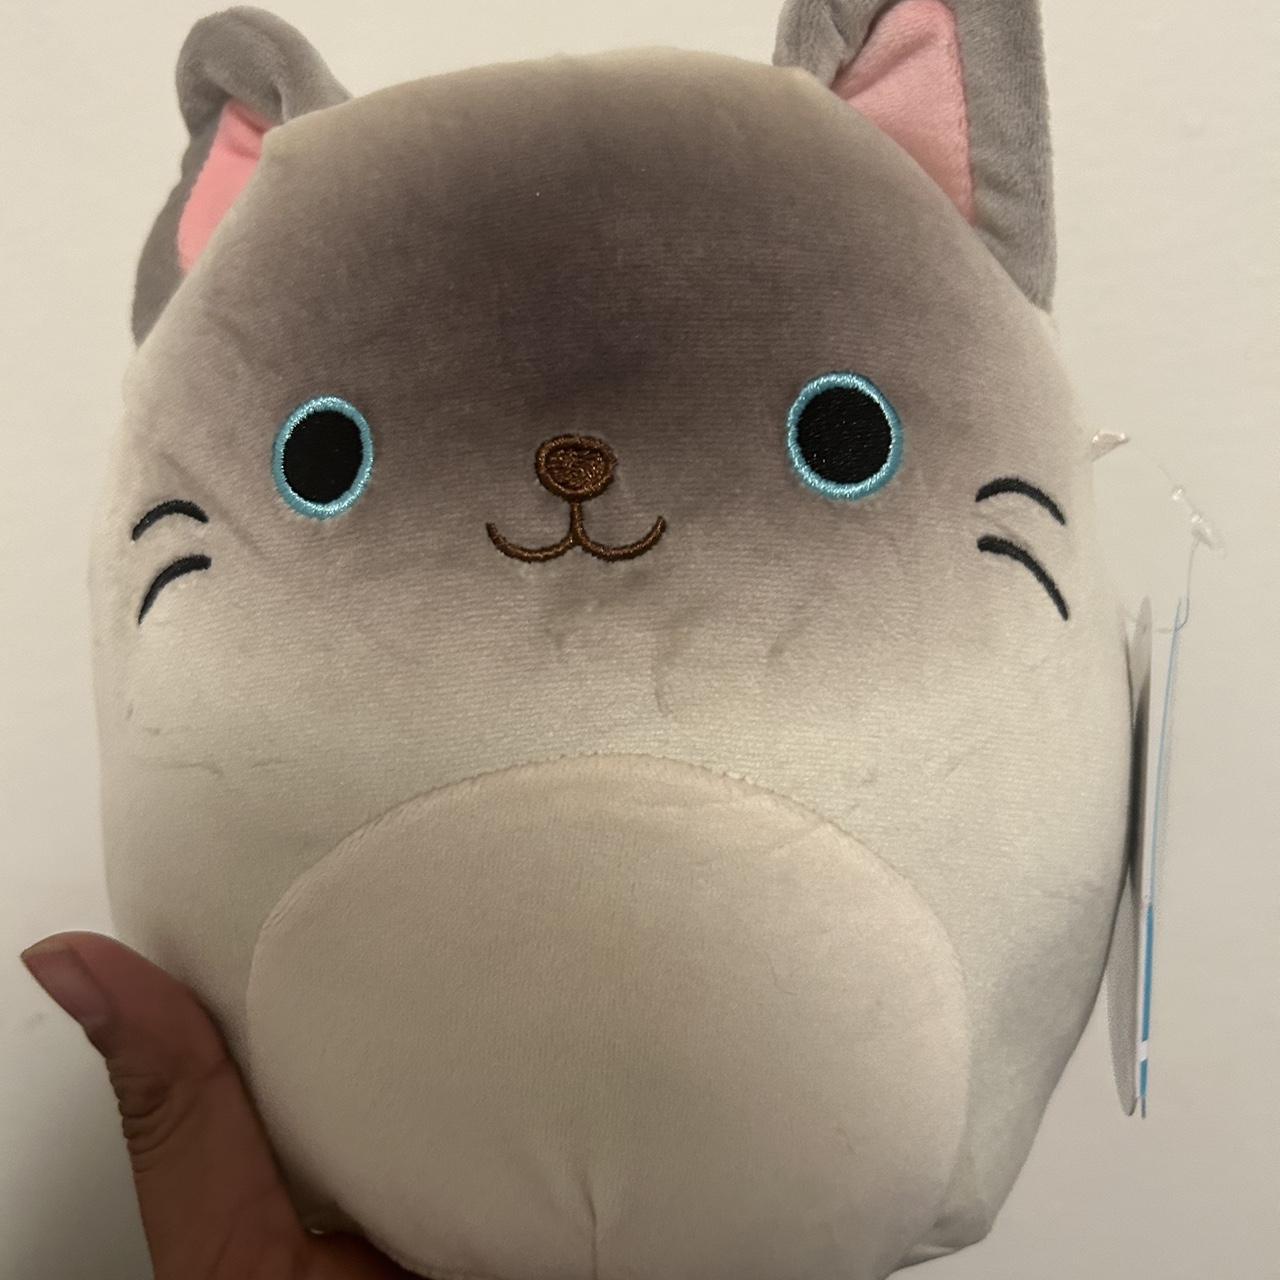 reese's peanut butter cups squishmallow kitty cat - Depop